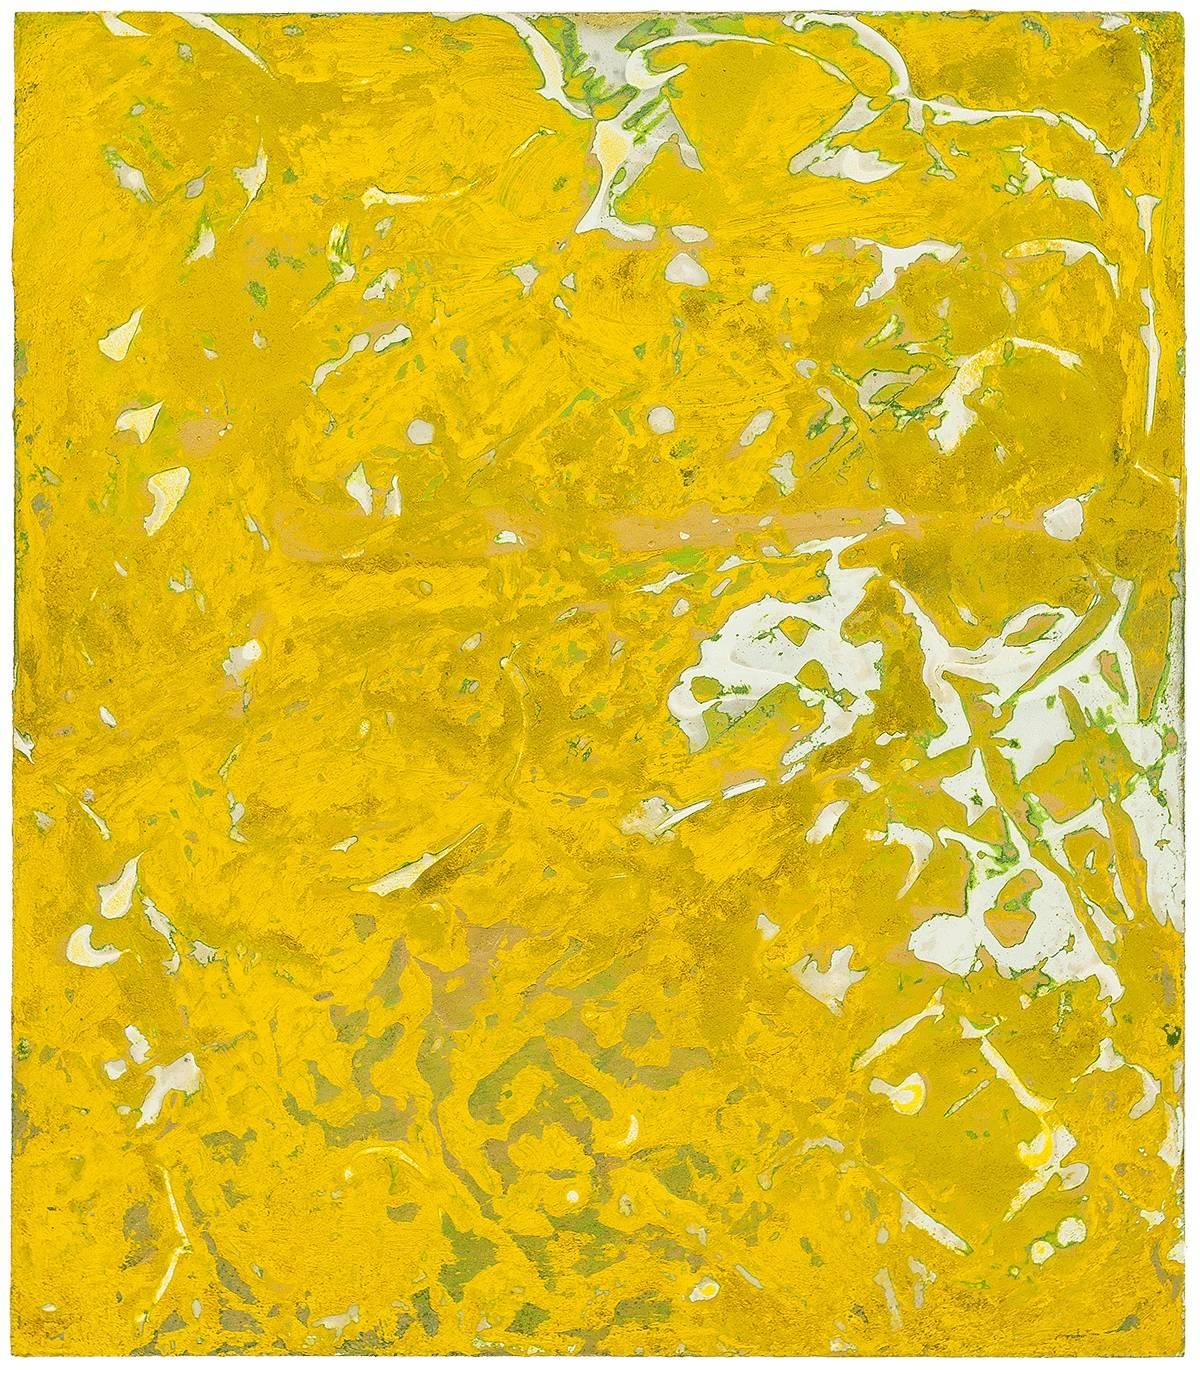 Yellow Love (With Green) - Mixed Media Art by Lynne Golob Gelfman